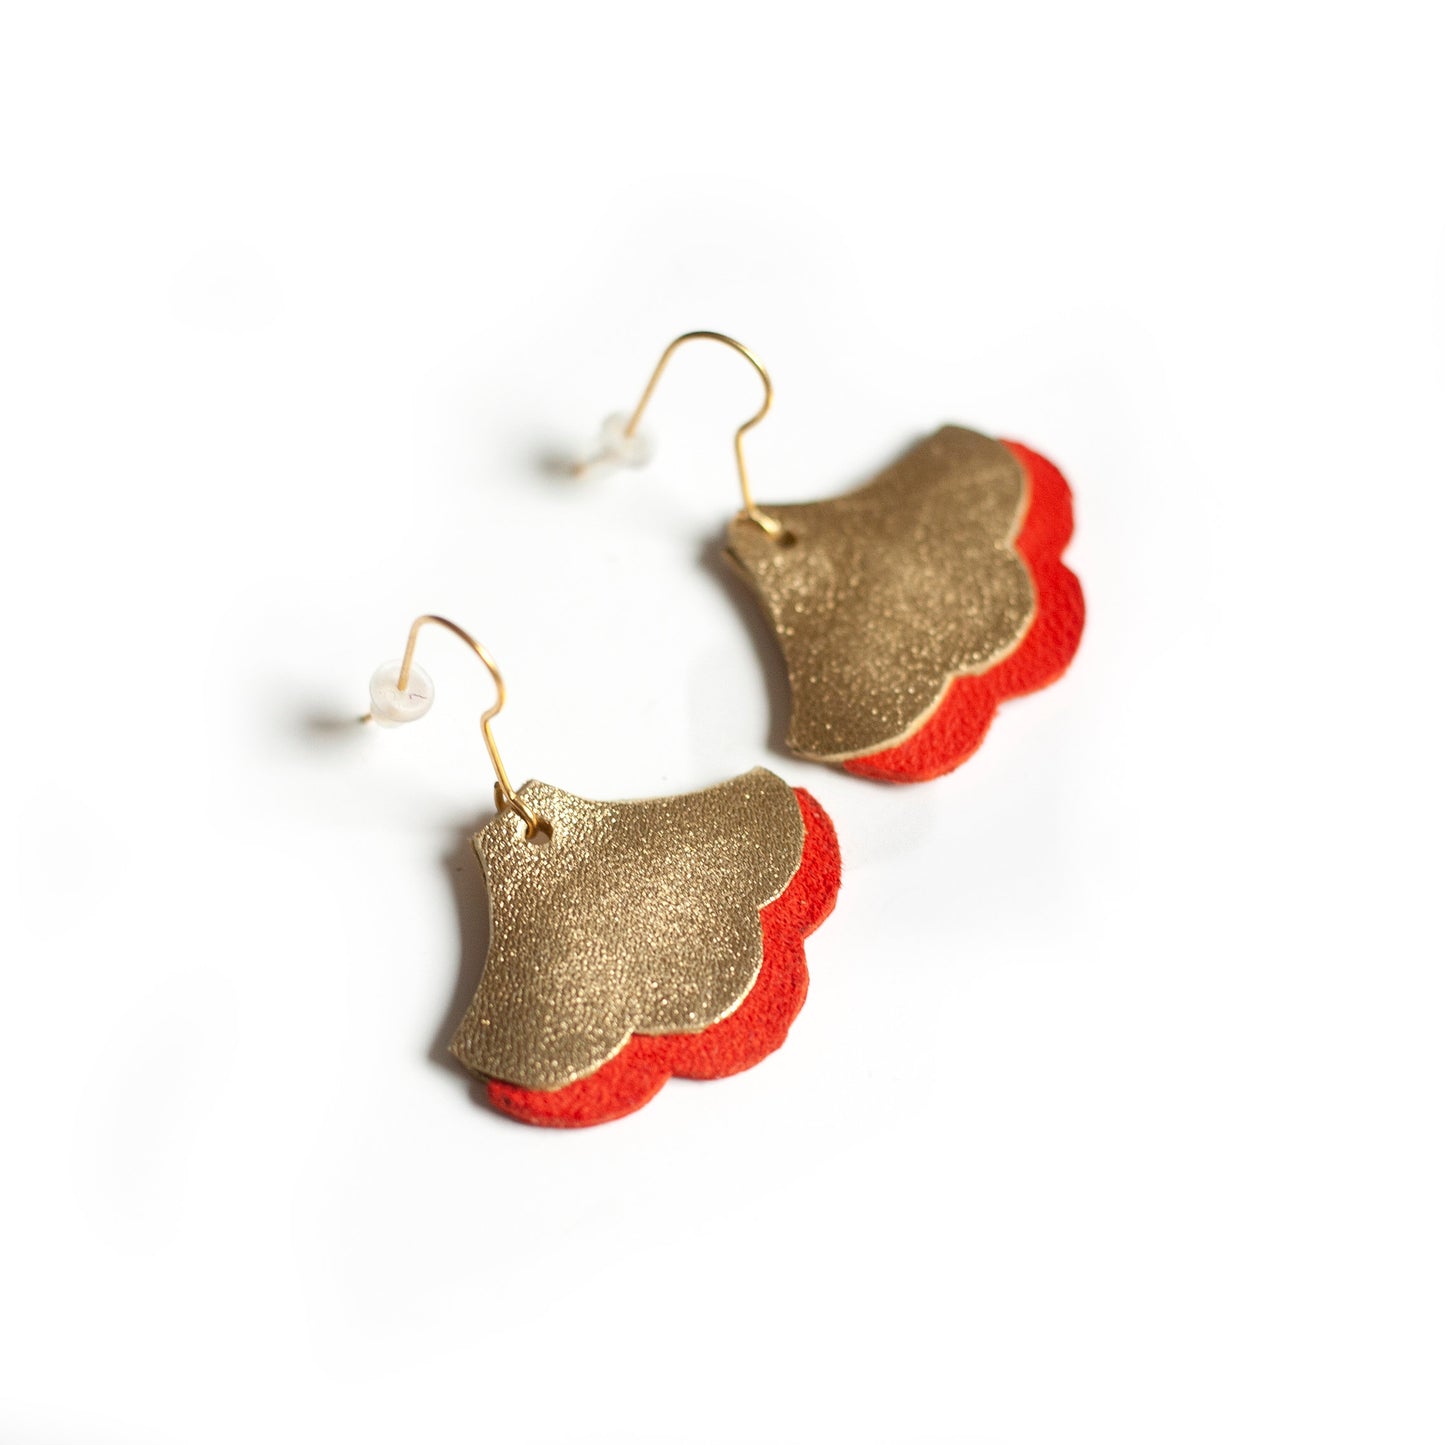 Ginkgo Biloba earrings in red and gold leather